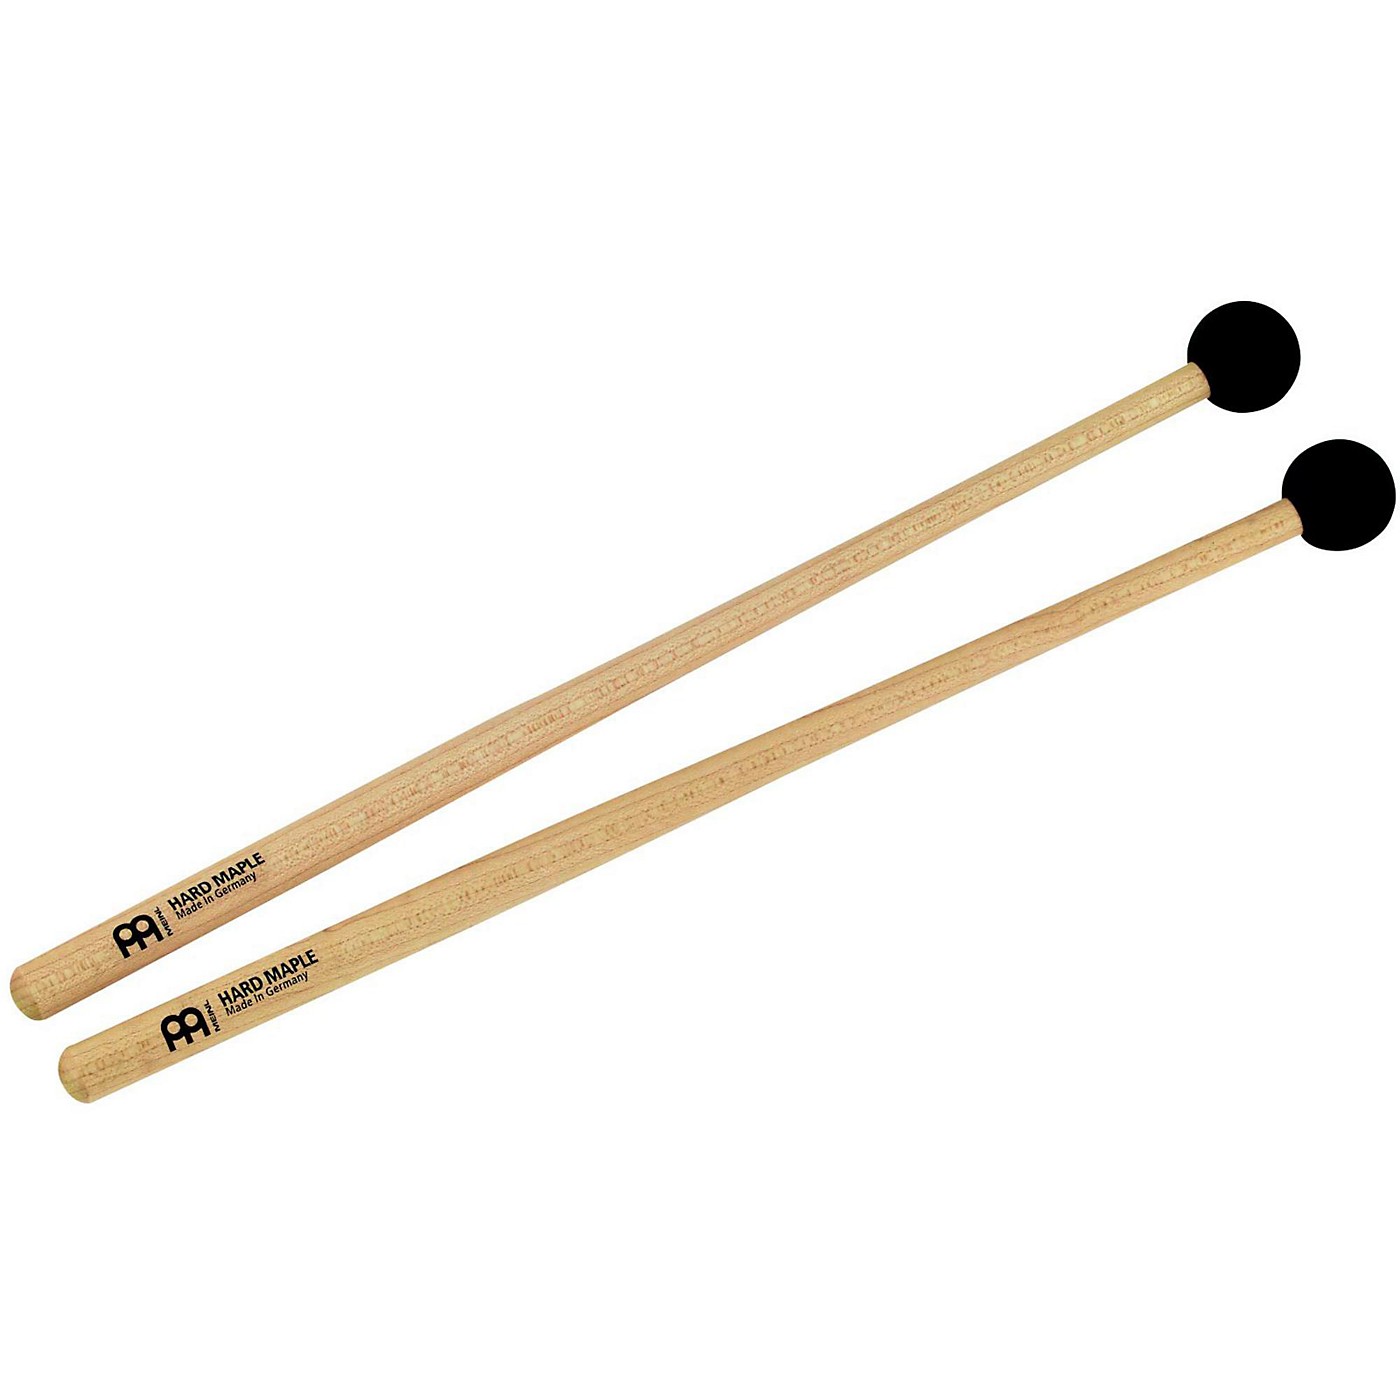 MEINL Percussion Mallet Pair with Small Soft Rubber Tips-Maple Handle thumbnail